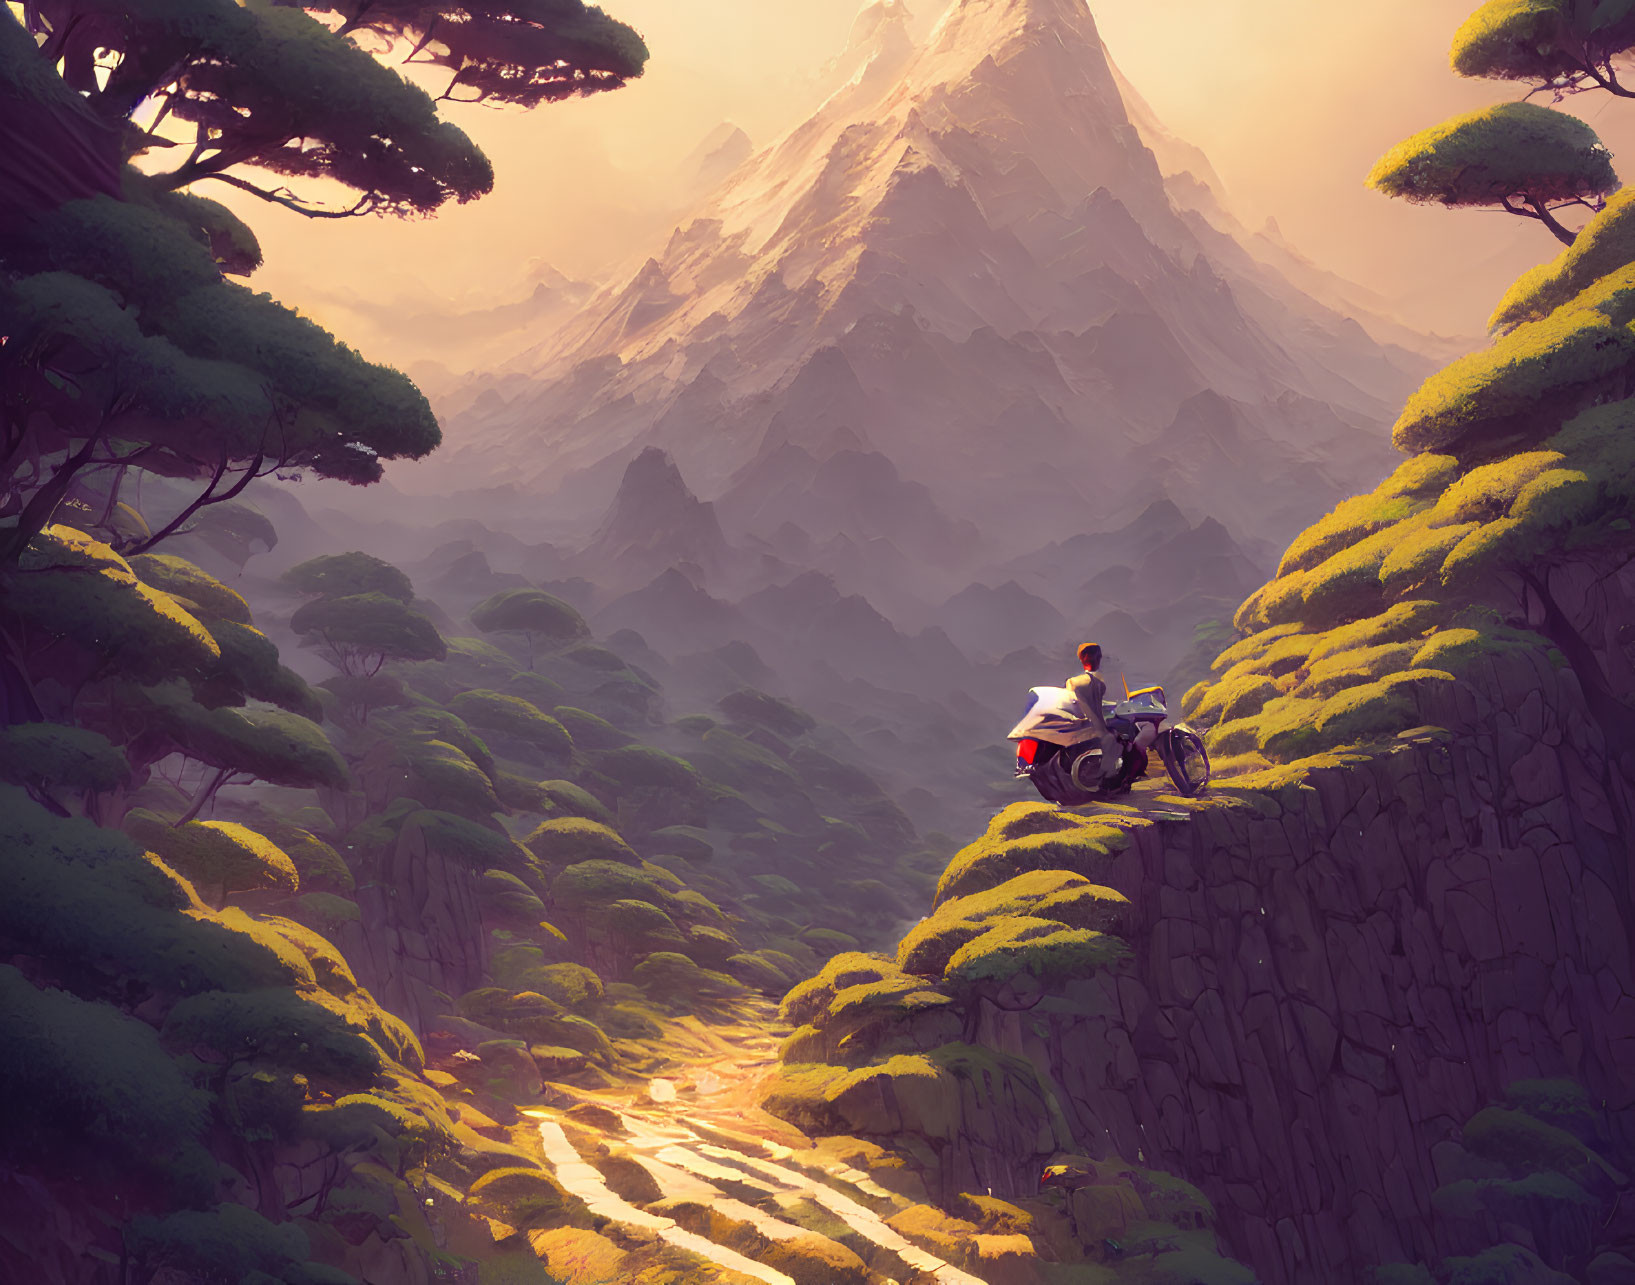 Motorcyclist on Cliff Overlooking Forest and Mountains